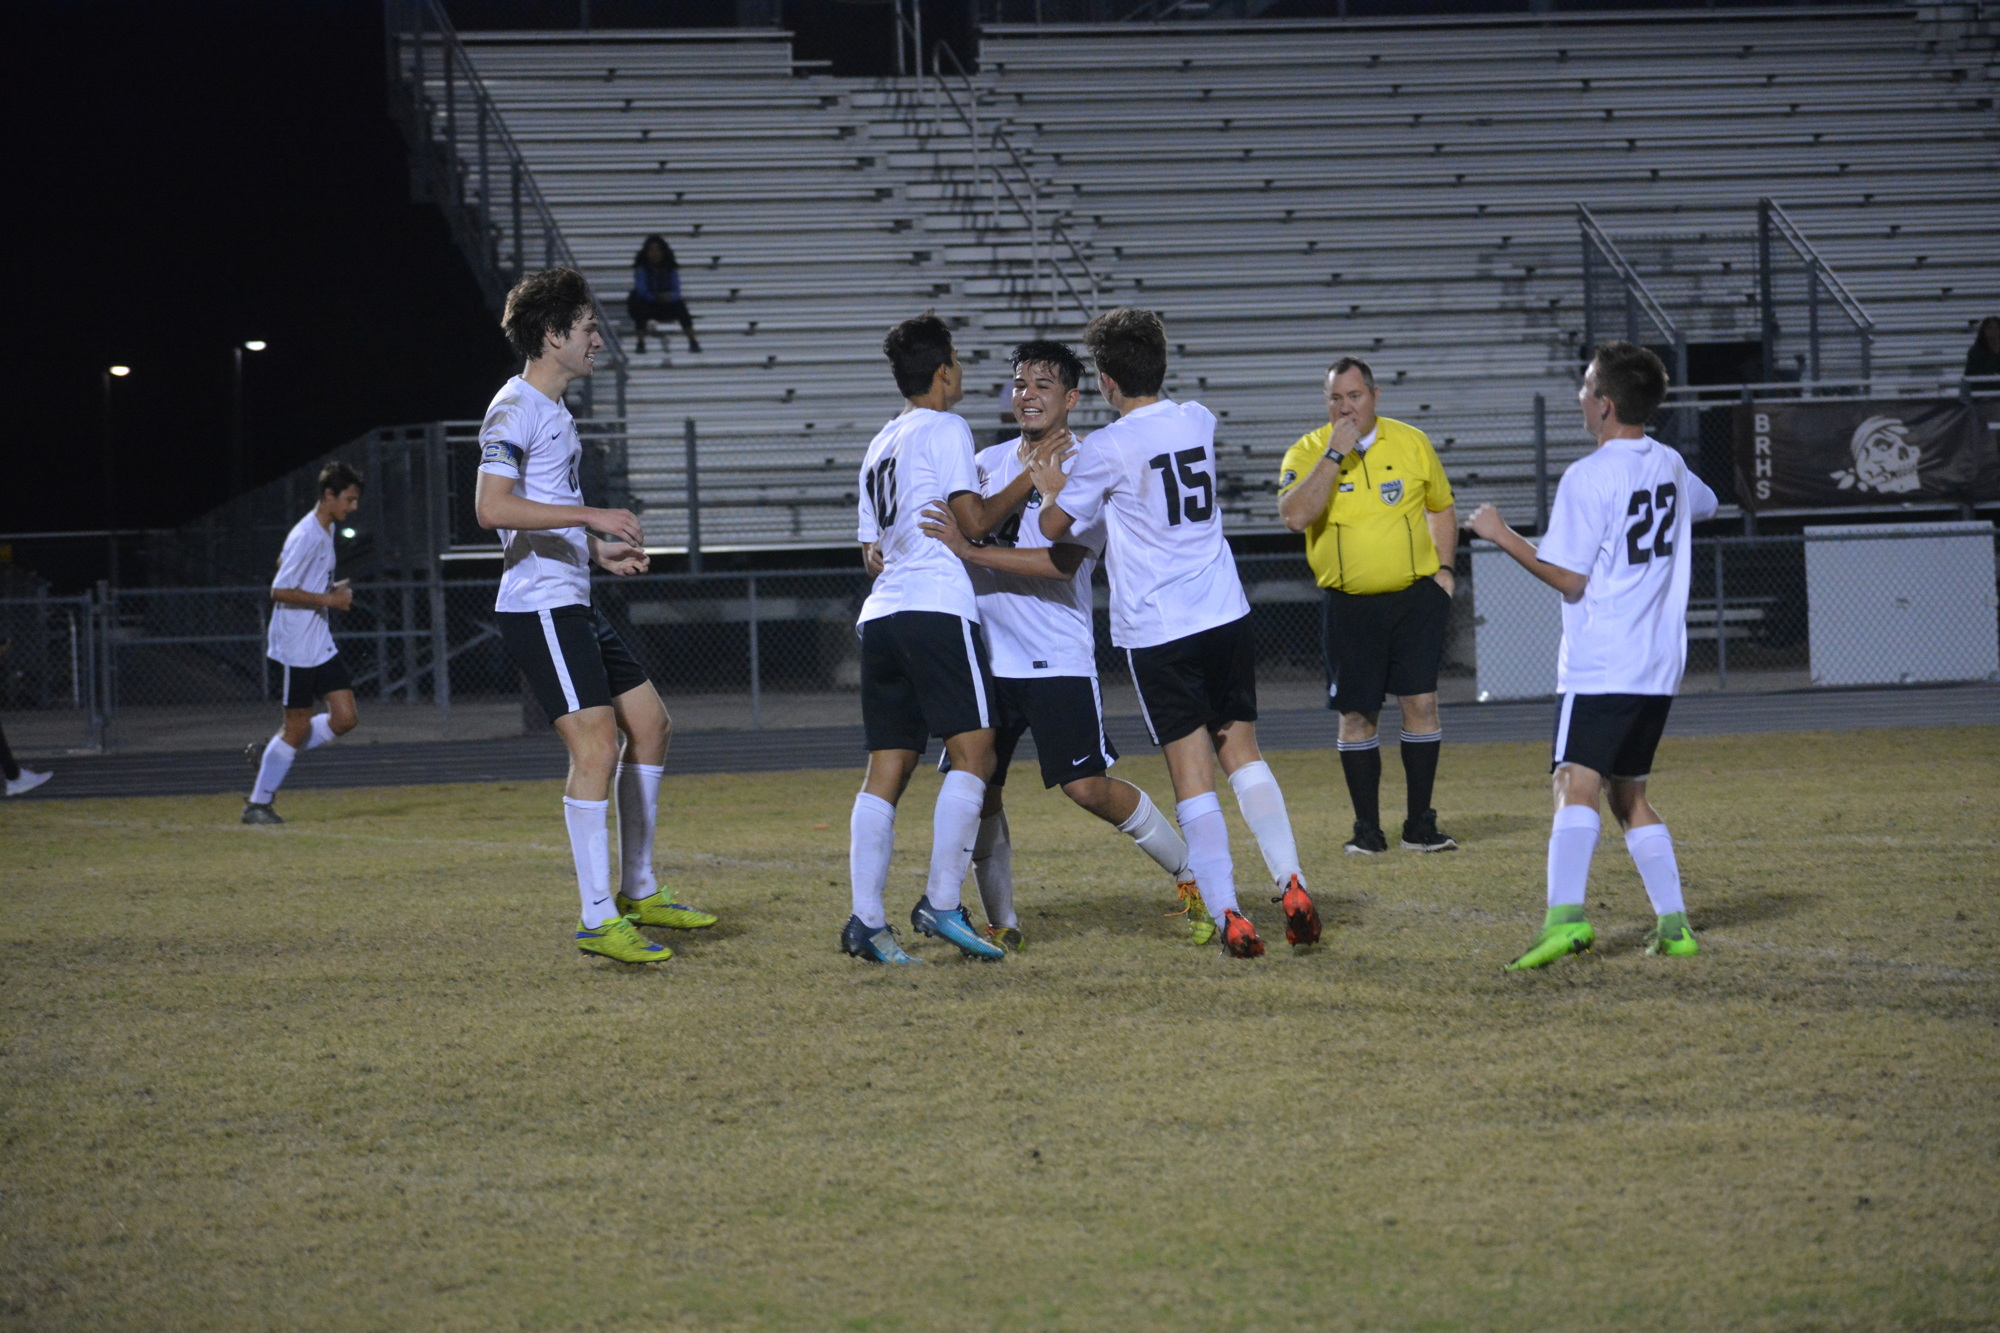 Senior Aystin Martinez (24) is mobbed by teammates after his second-half goal.